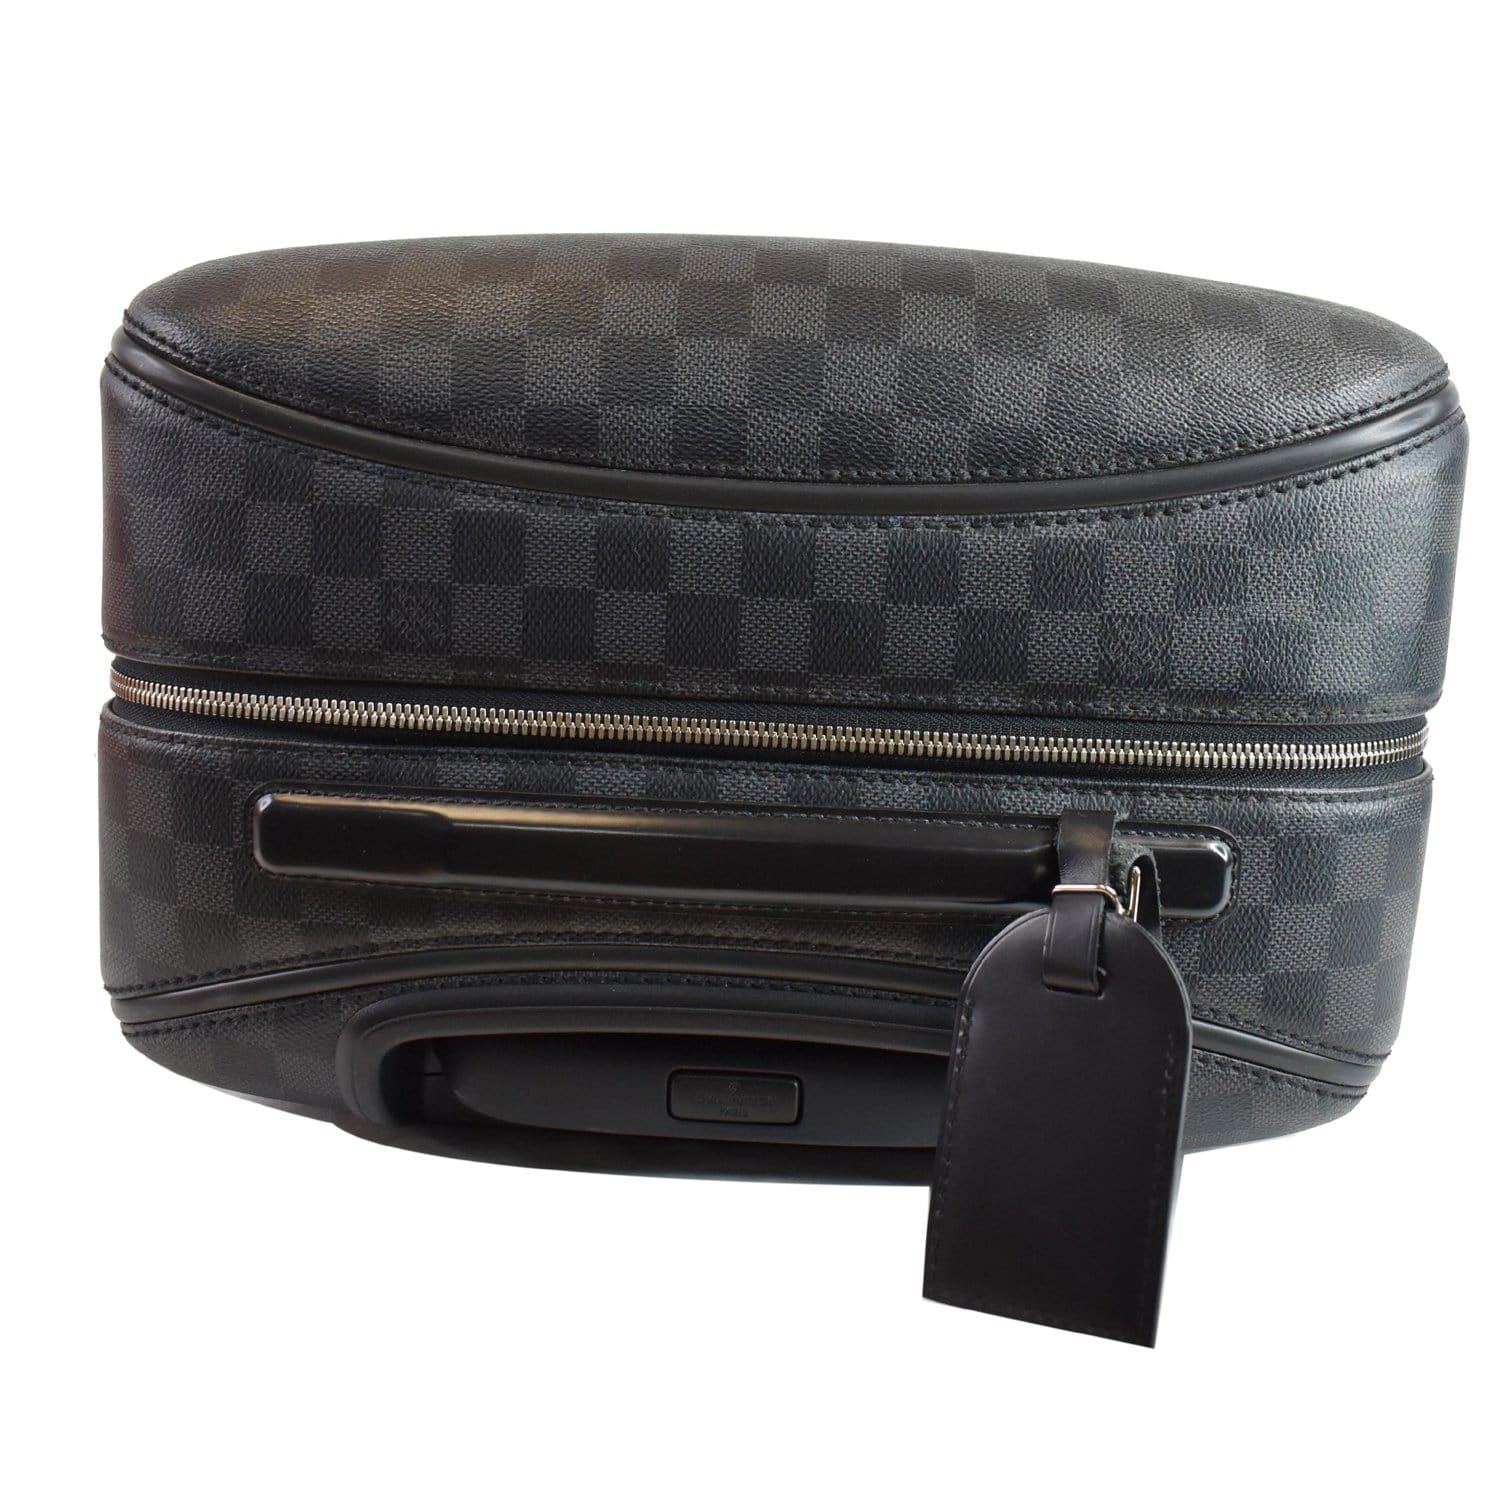 Louis Vuitton Monogram Zephyr 55 Roller Luggage - Carry On Size